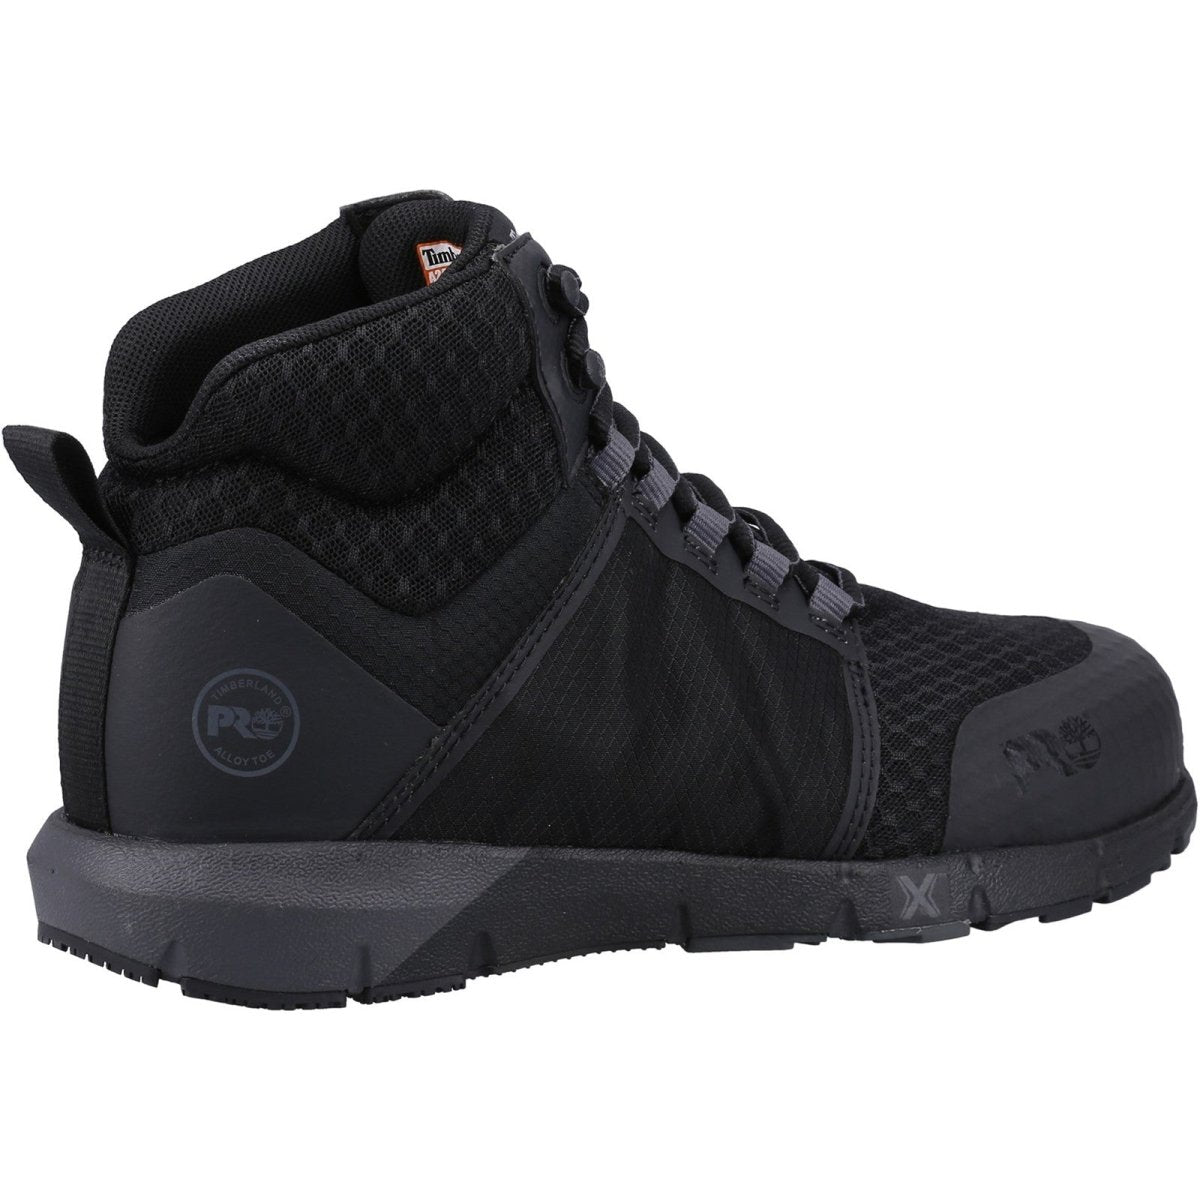 Timberland Pro Radius Mid Composite Toe Safety Work Boots - Shoe Store Direct